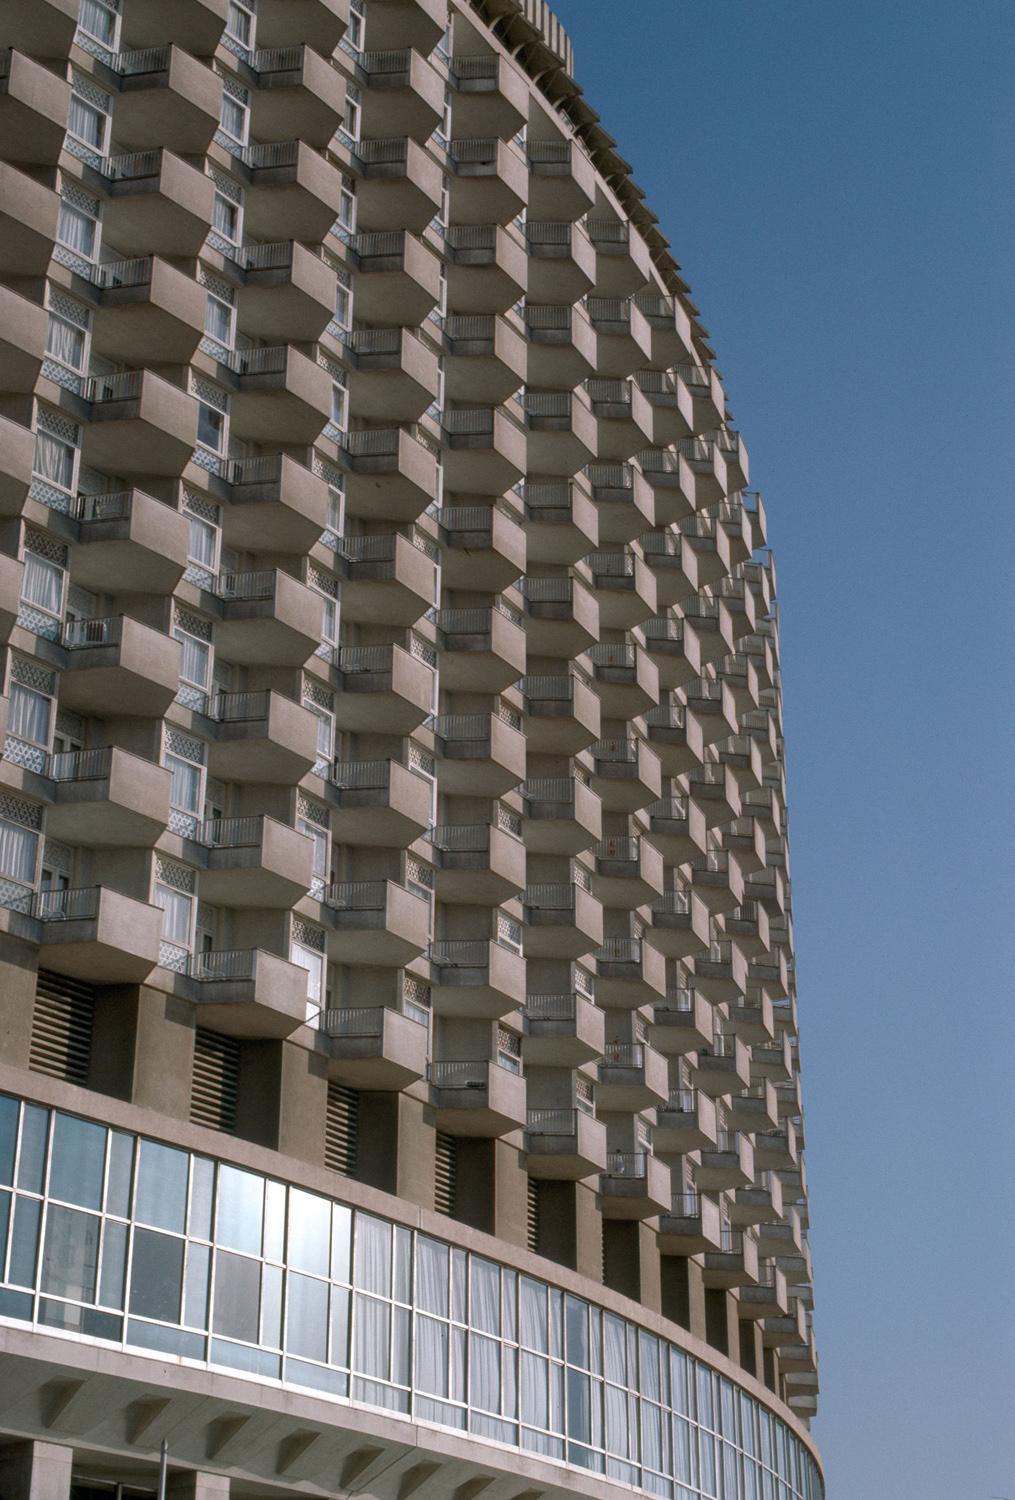 Old hotel building (formerly Meridien Hotel), Nile facade with balconies